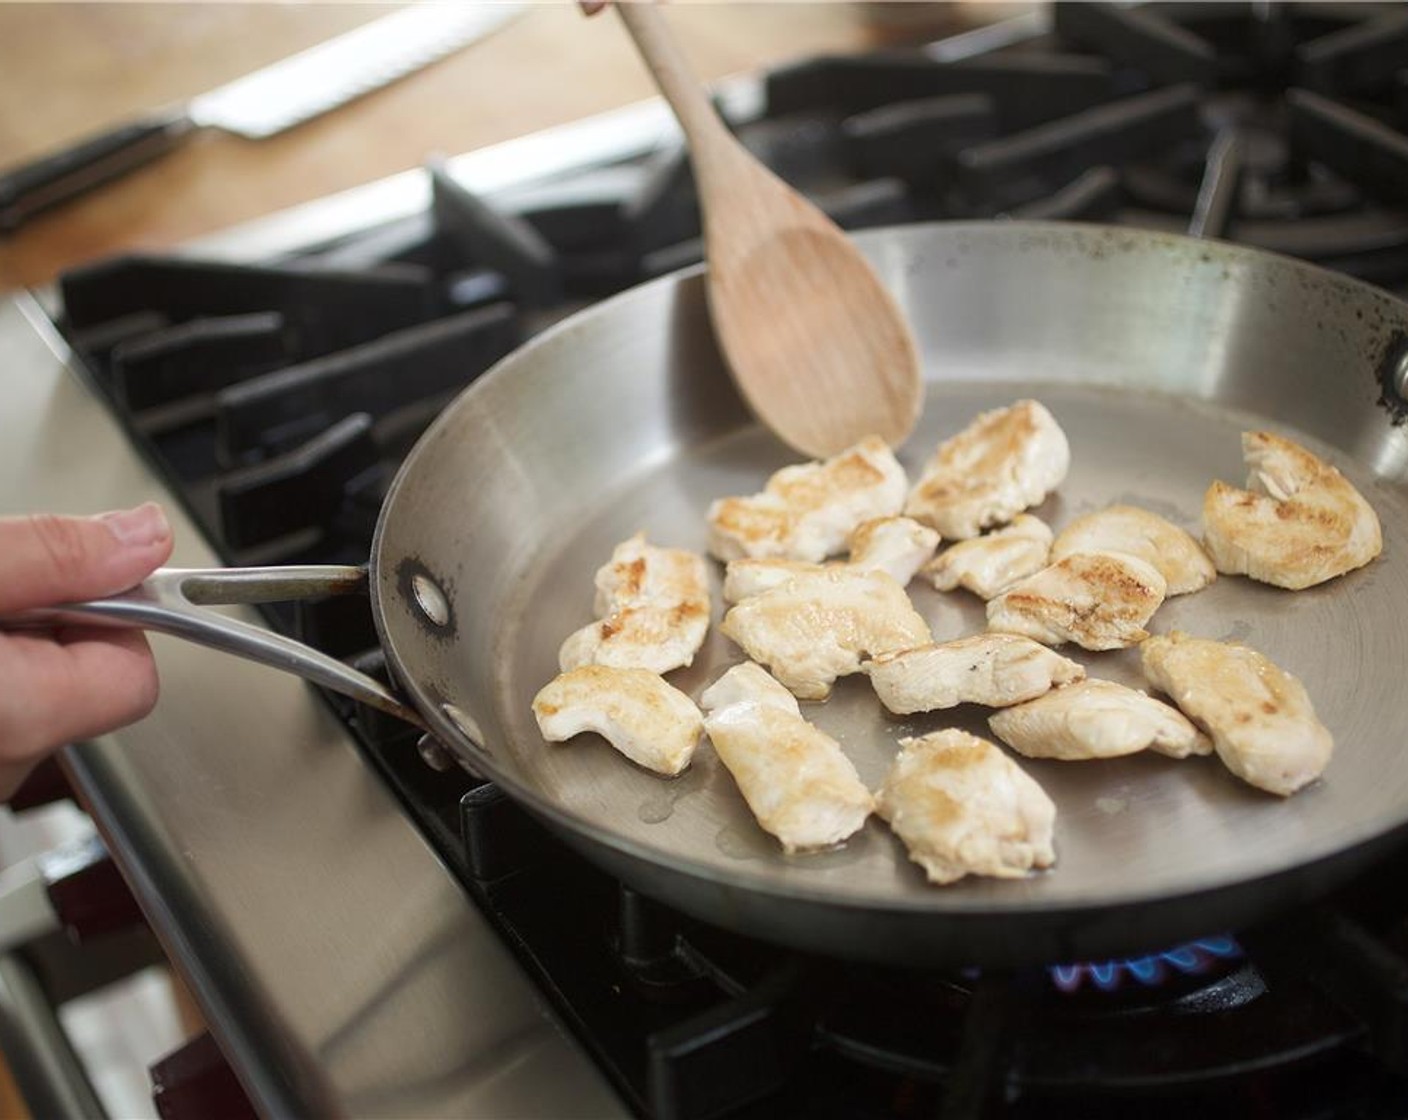 step 5 In a saute pan, heat 2 teaspoons of canola oil over medium-high heat. When the oil is hot, add the chicken and cook for 3 minutes, stirring occasionally. Remove chicken from the pan and set aside.